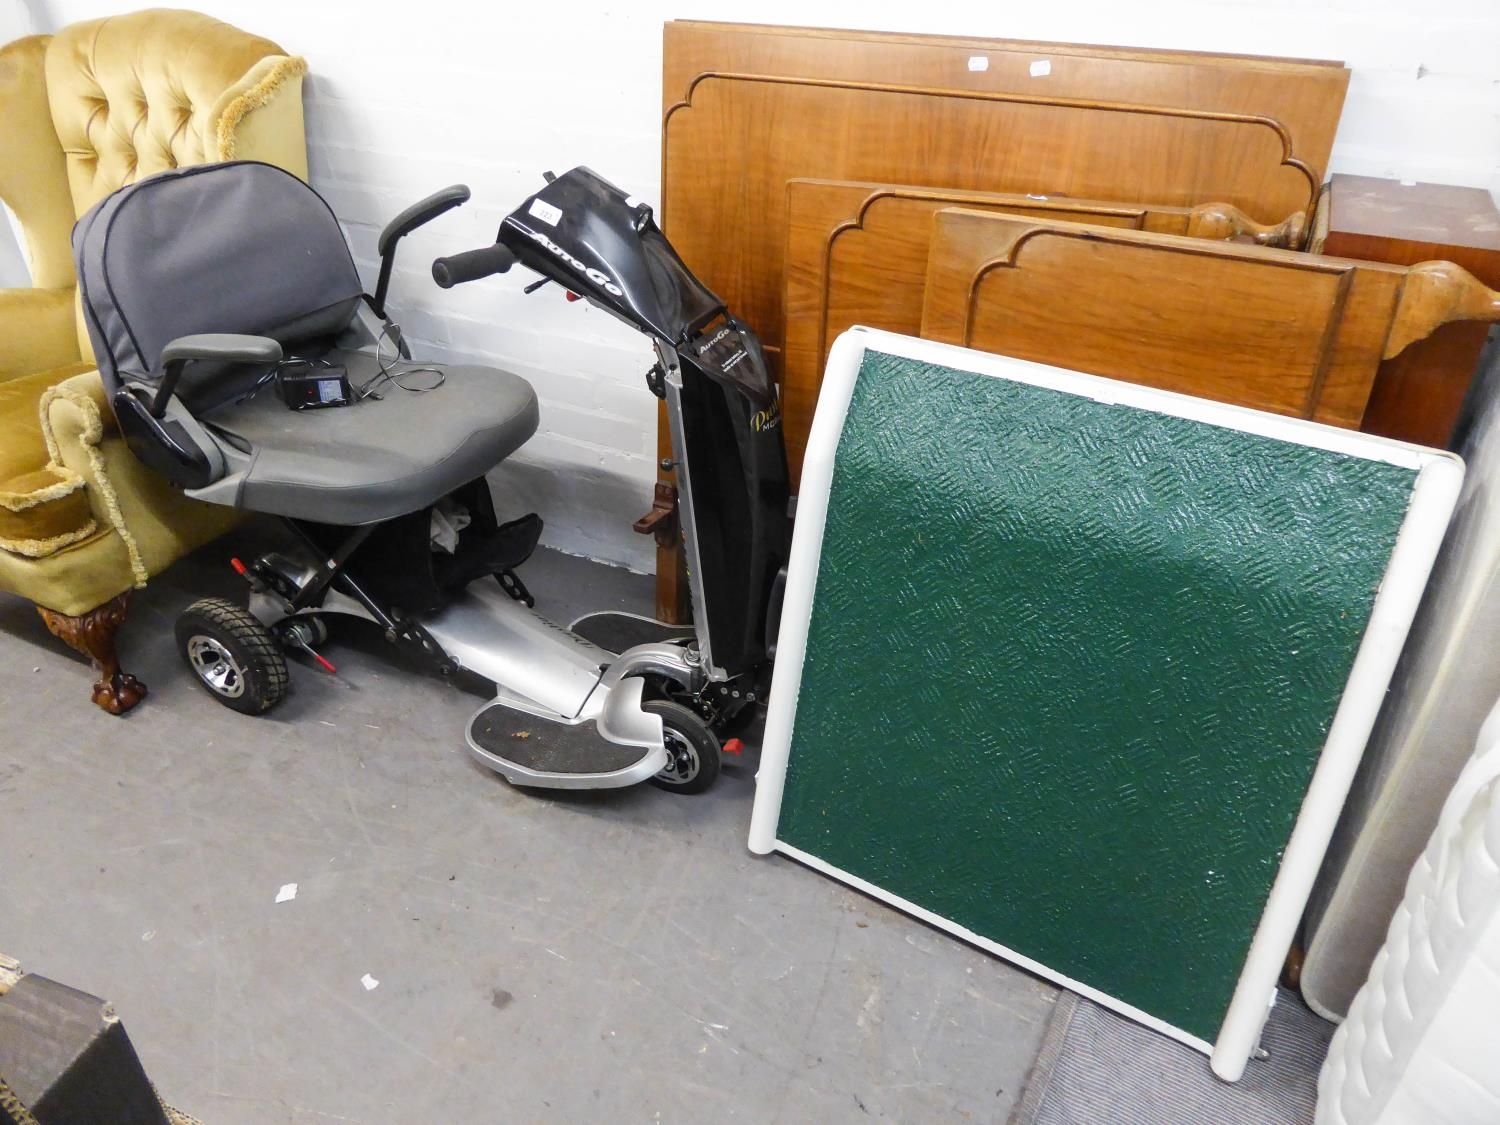 A PRESTIGE MOBILITY 'AUTOGO' ELECTRIC SCOOTER AND A FOLDING RAMP (WORKING CONDITION UNKNOWN, NO